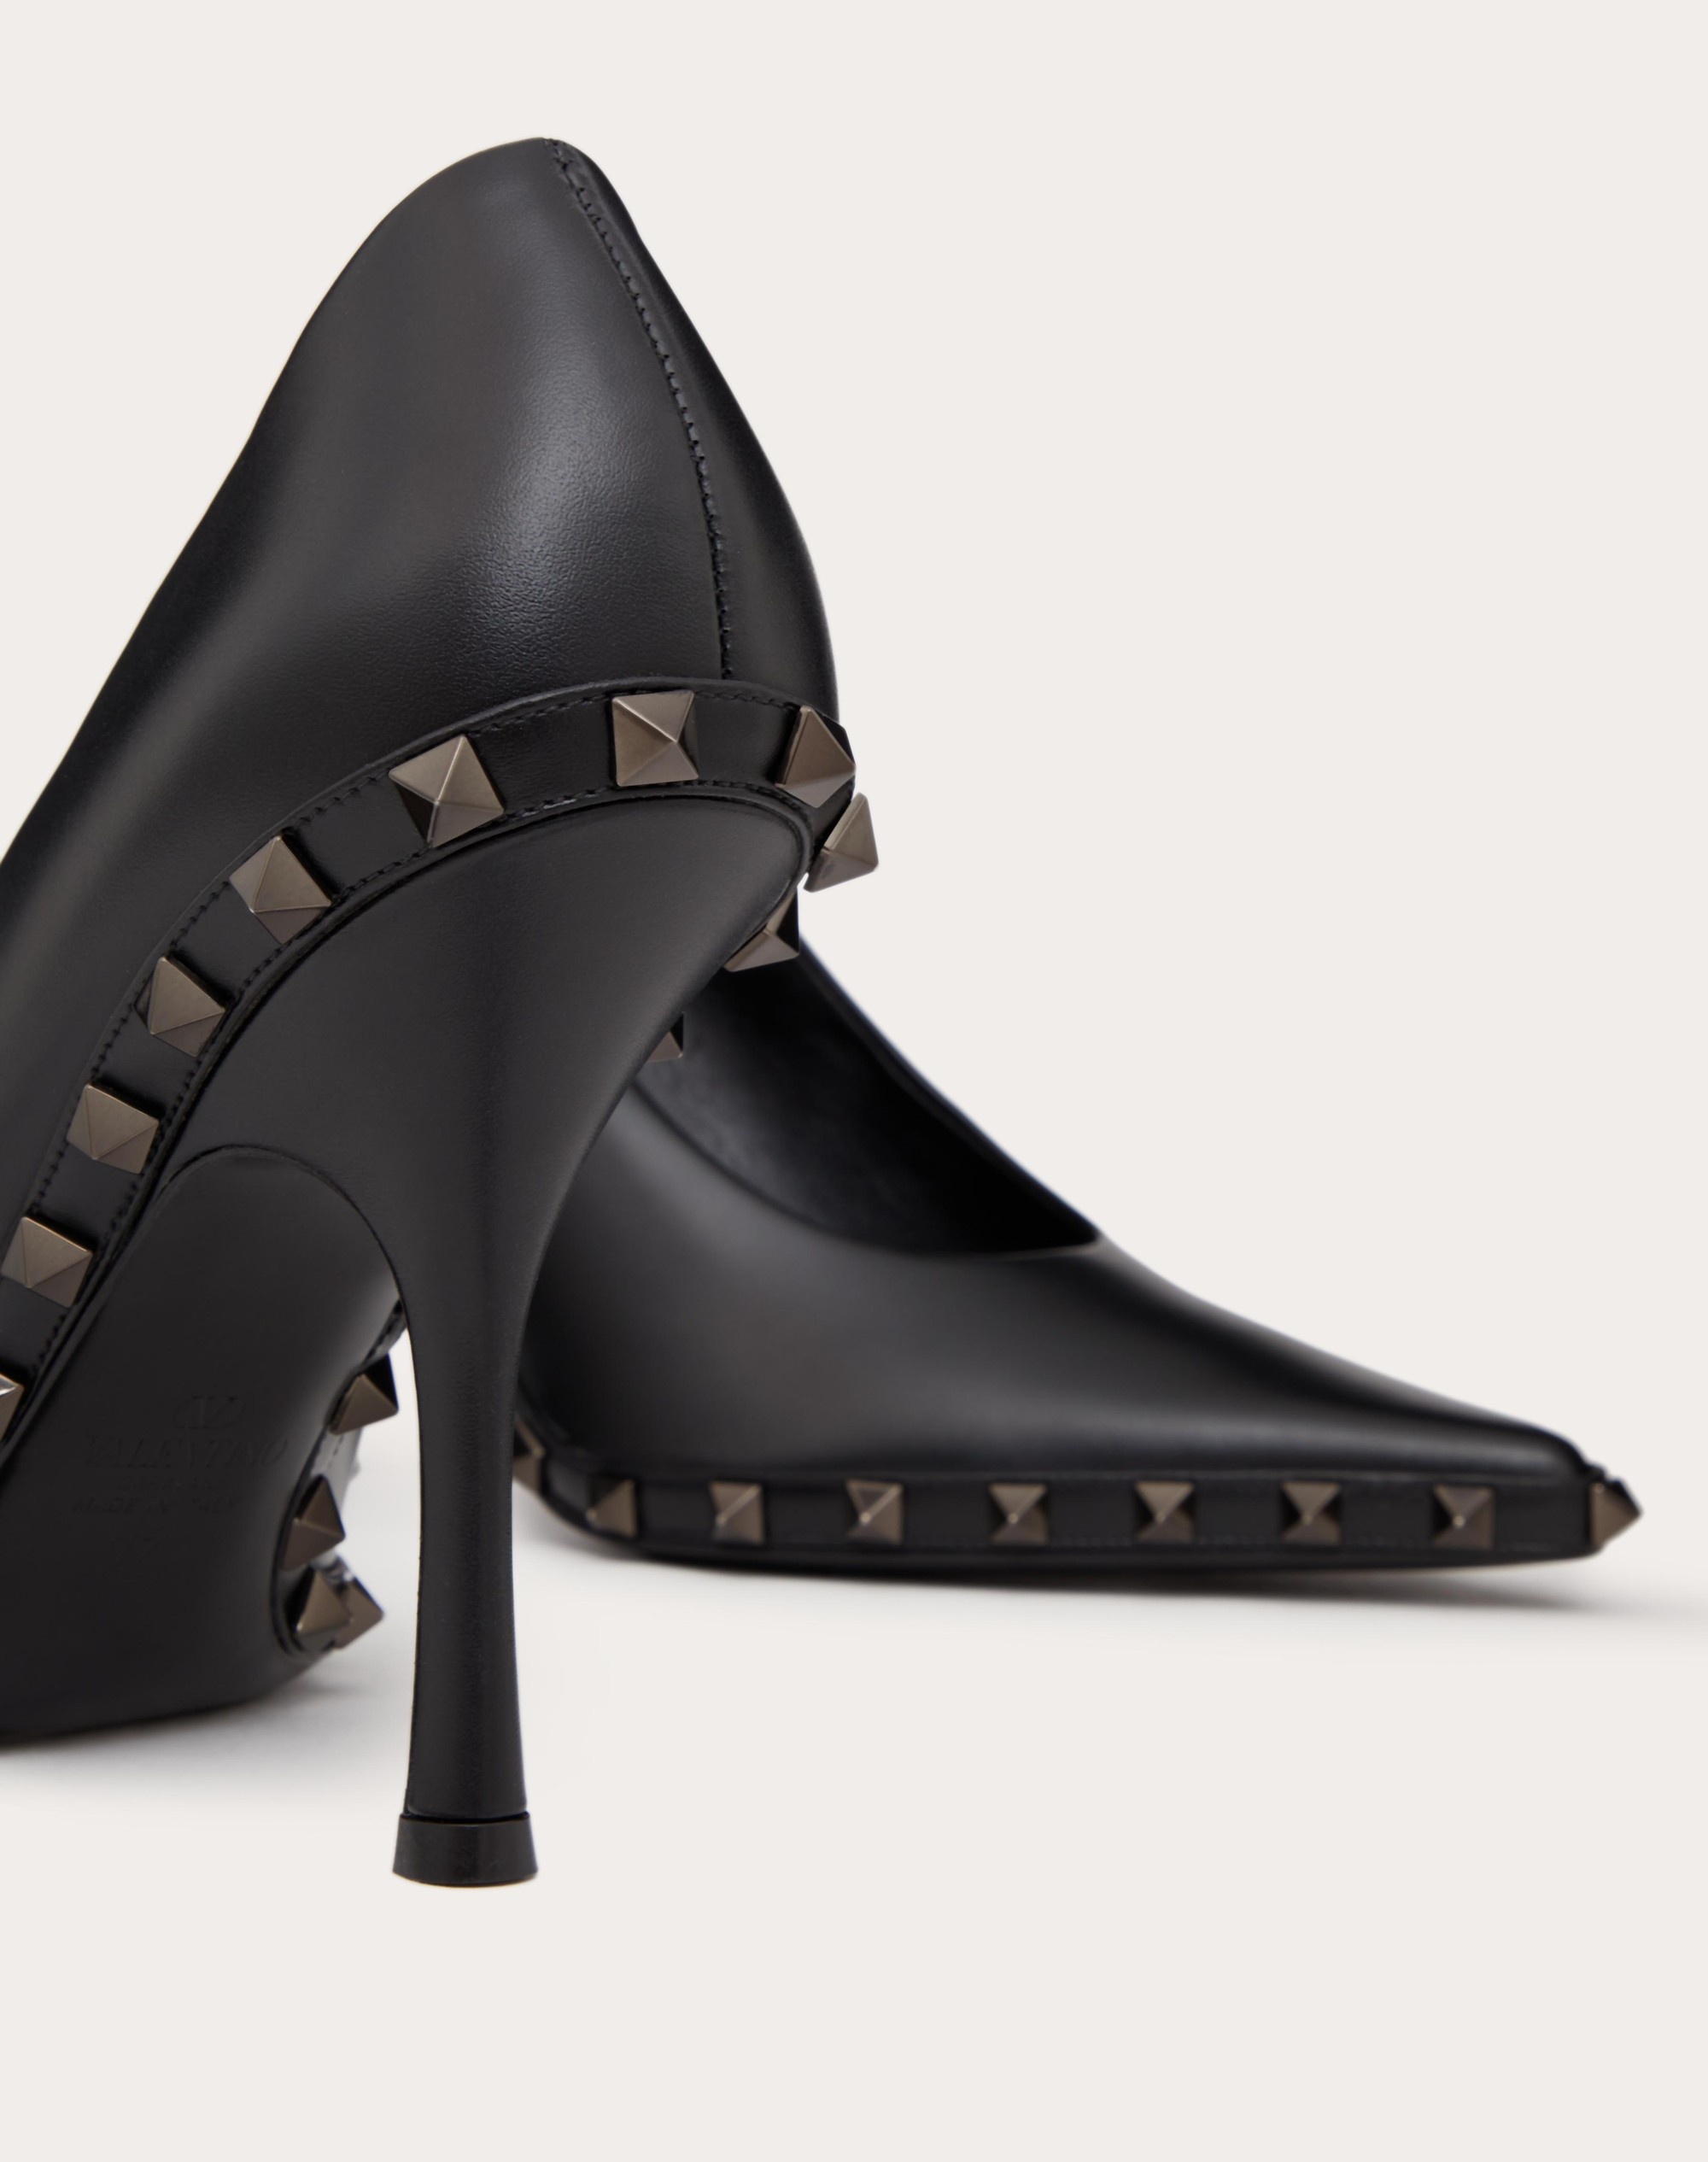 ROCKSTUD PUMPS IN CALFSKIN WITH TONE-ON-TONE STUDS 100MM - 5